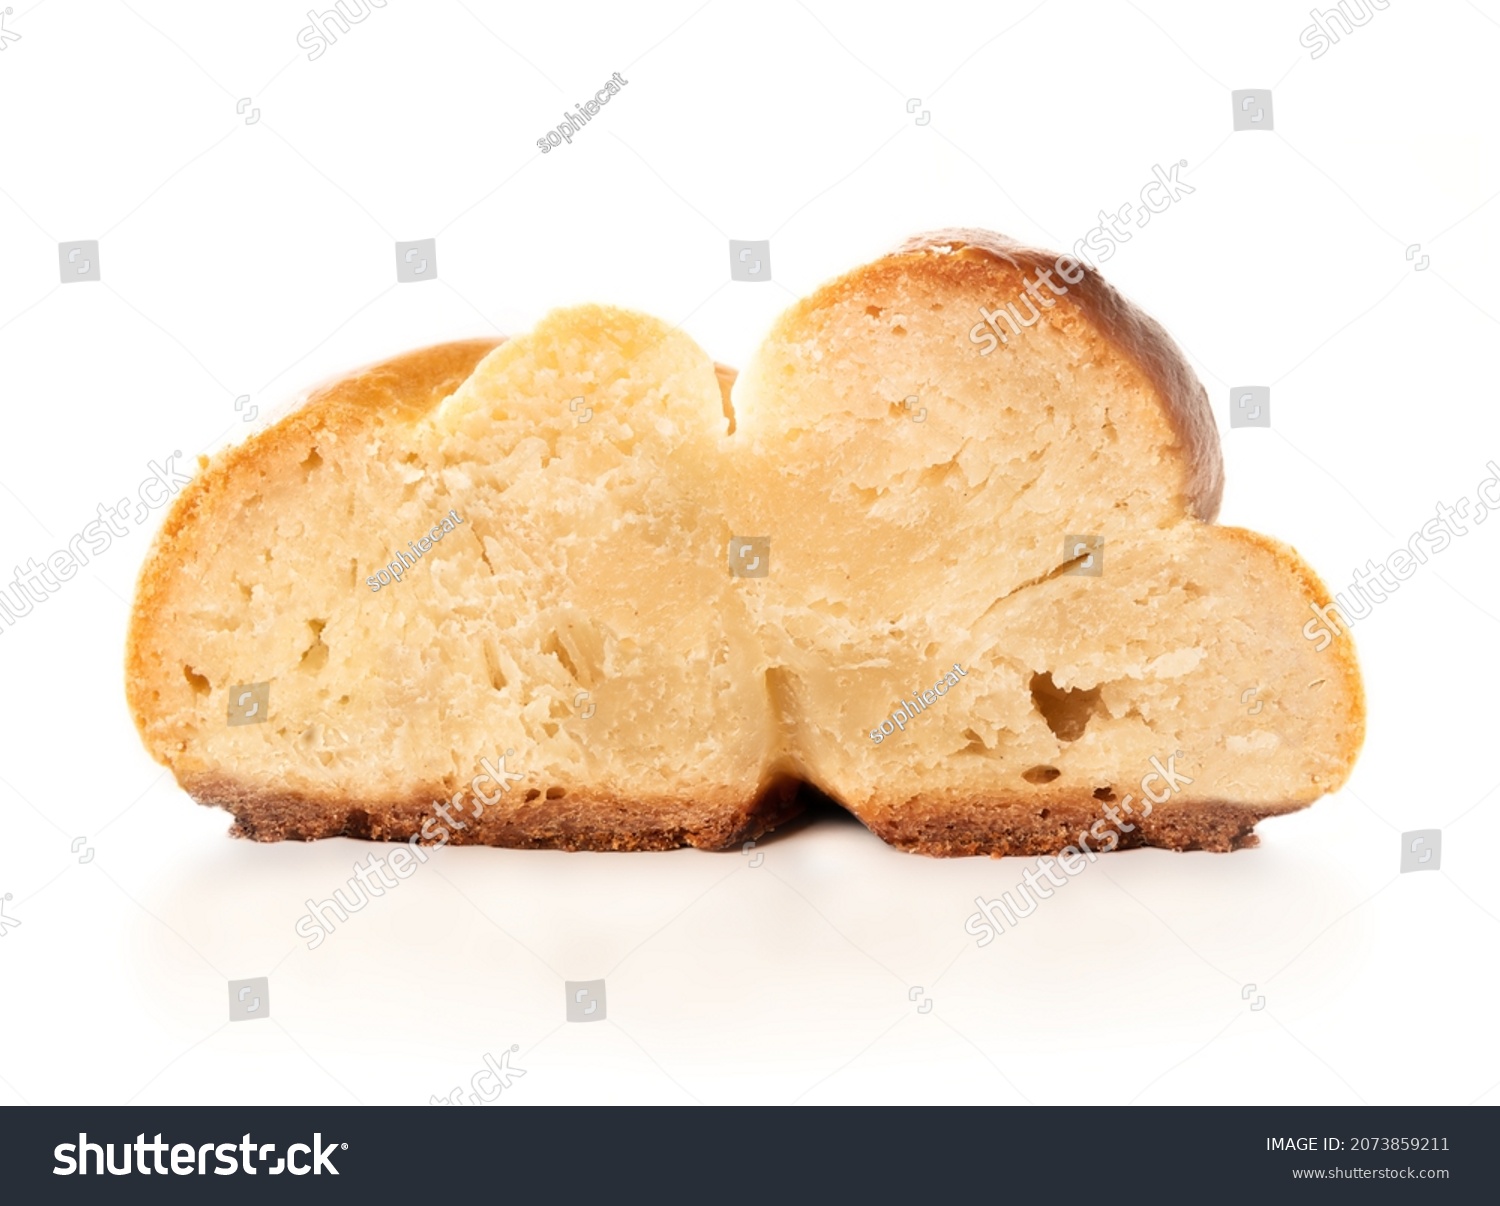 Baked yeast bread slice with undercooked and raw dough. Cross-section of white bread called zopf or challa. Concept for danger of eating raw dough, baking problems or stove broken. Isolated on white. #2073859211